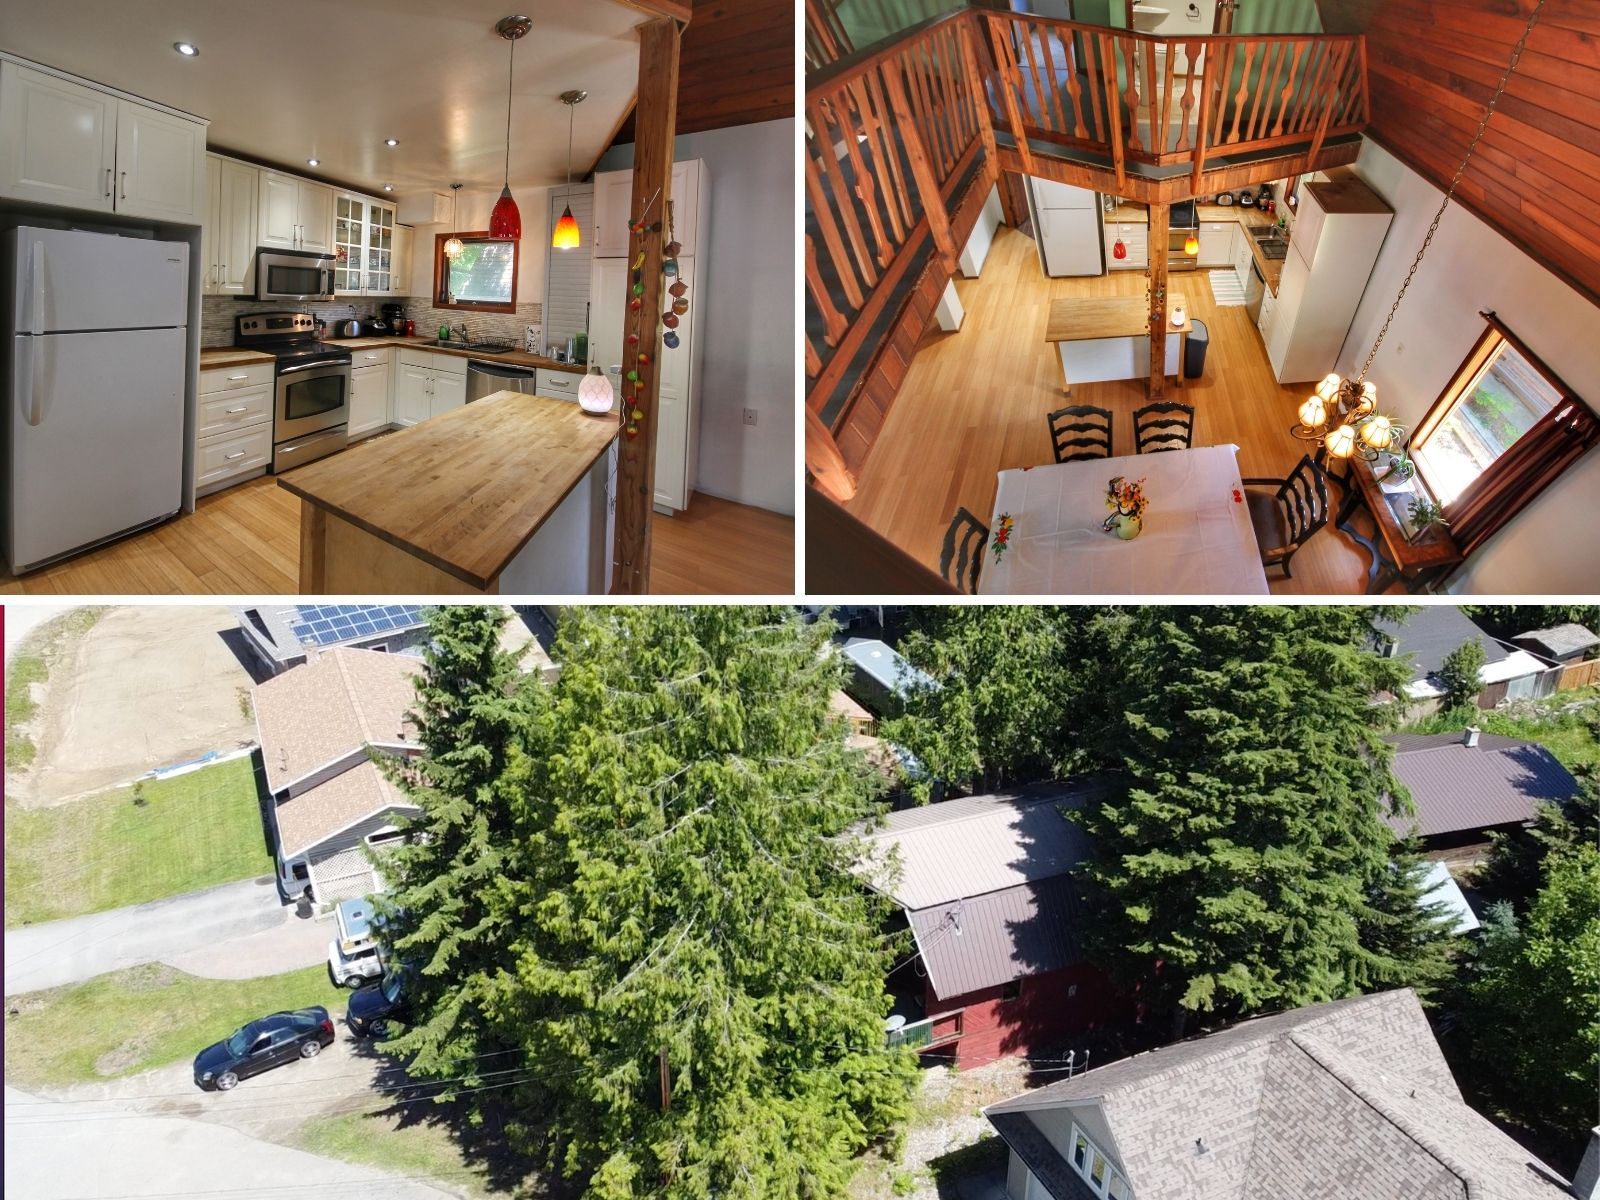 Main Photo: 1409 Amhurst Road in Sicamous: House for sale : MLS®# 10233576